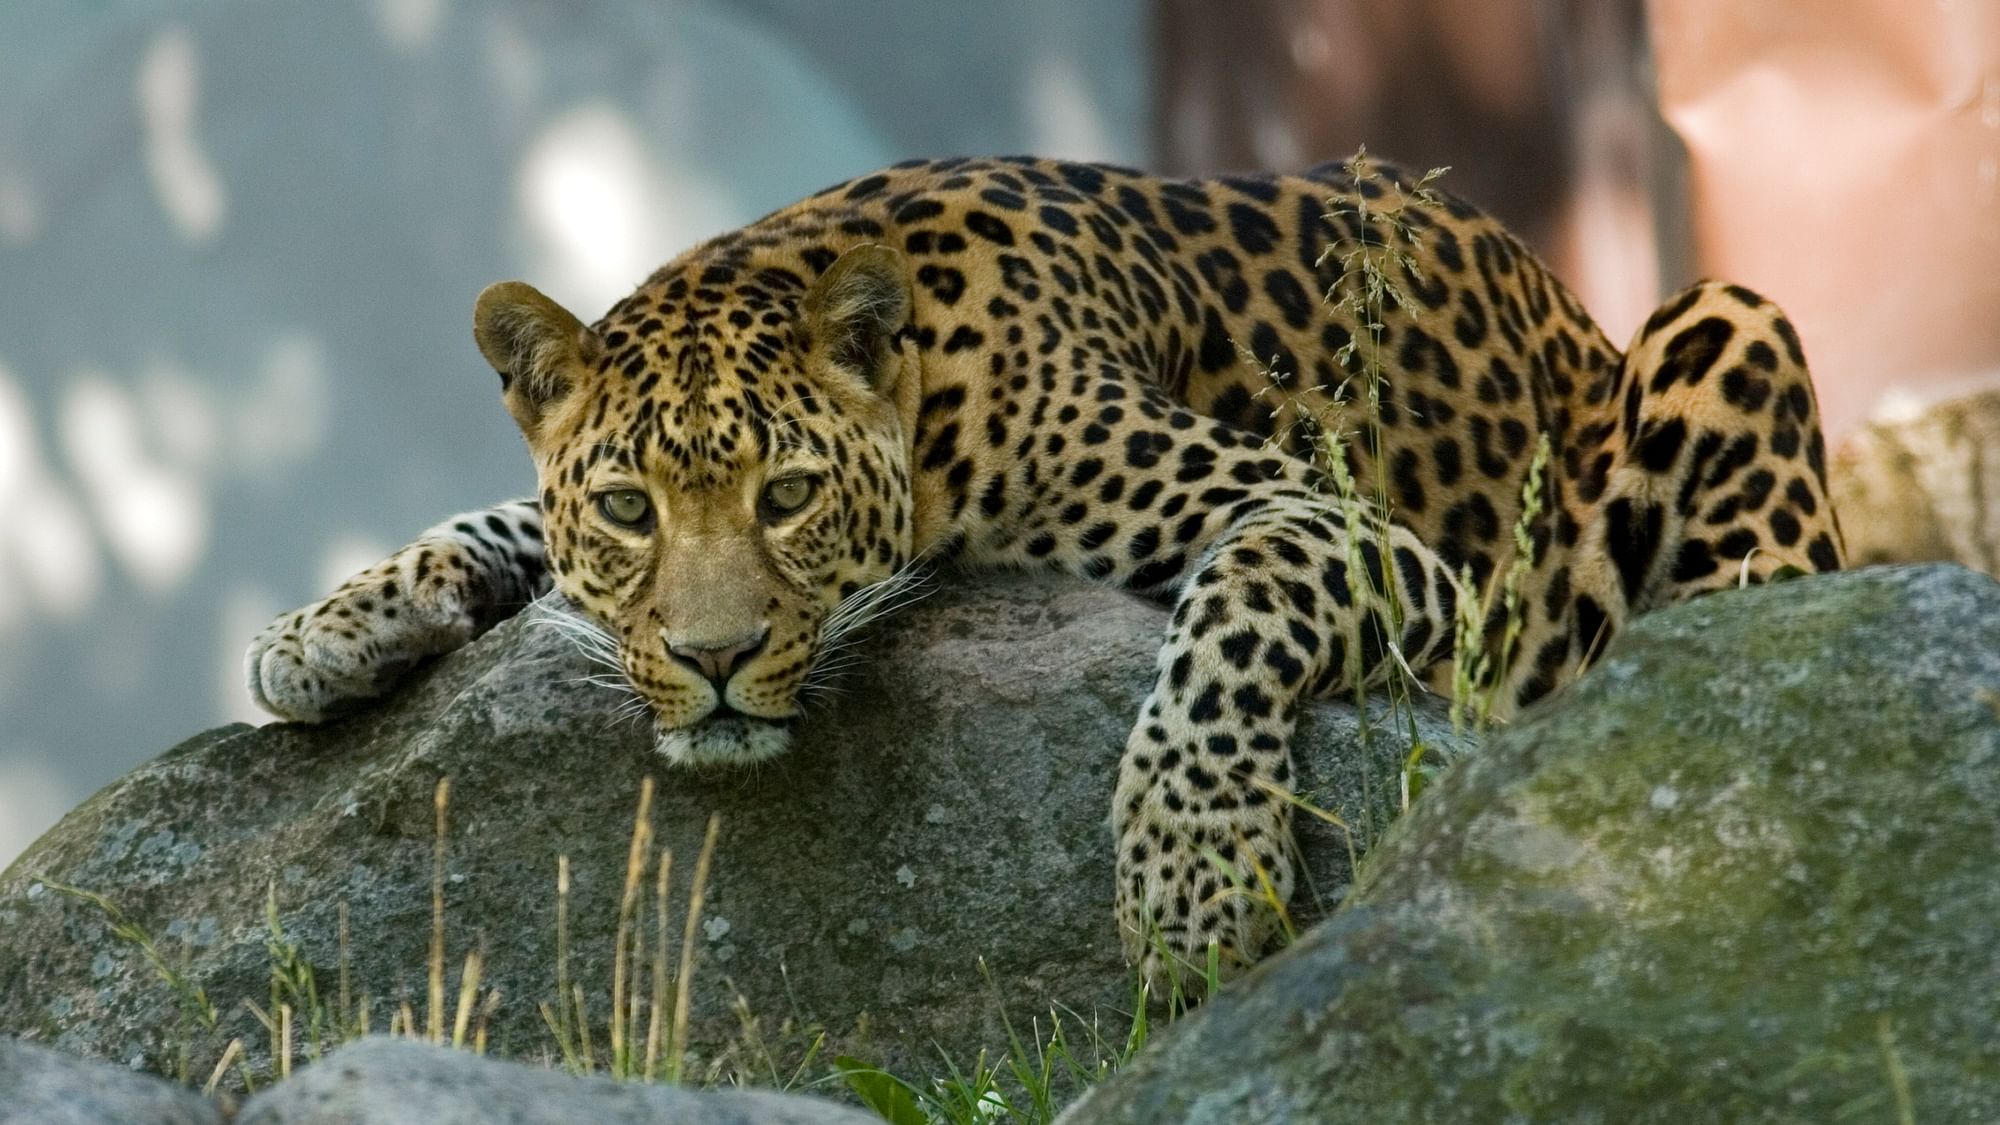 A leopard was killed after it found its way into a village, injuring three people and causing panic.